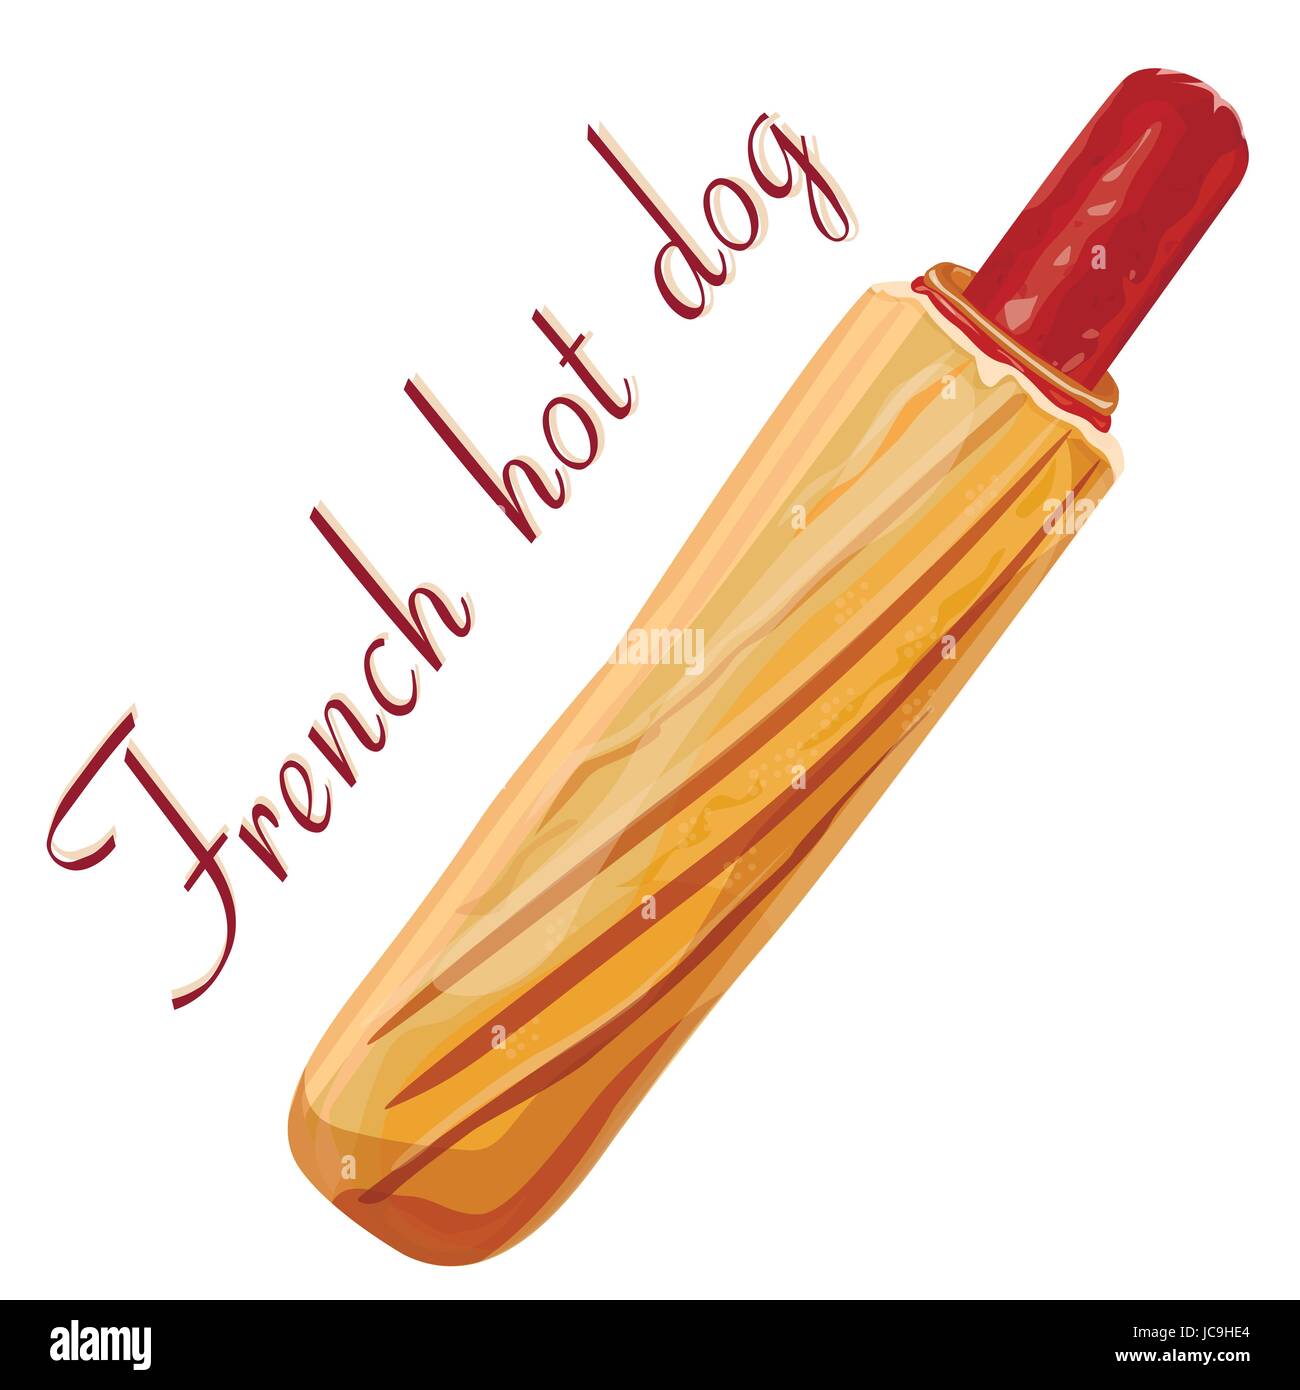 Hot dog: meat sausage, banger or frankfurter, mustard, mayonnaise, ketchup, fresh French baguette grilled bun. Vector square close-up sign side view i Stock Vector